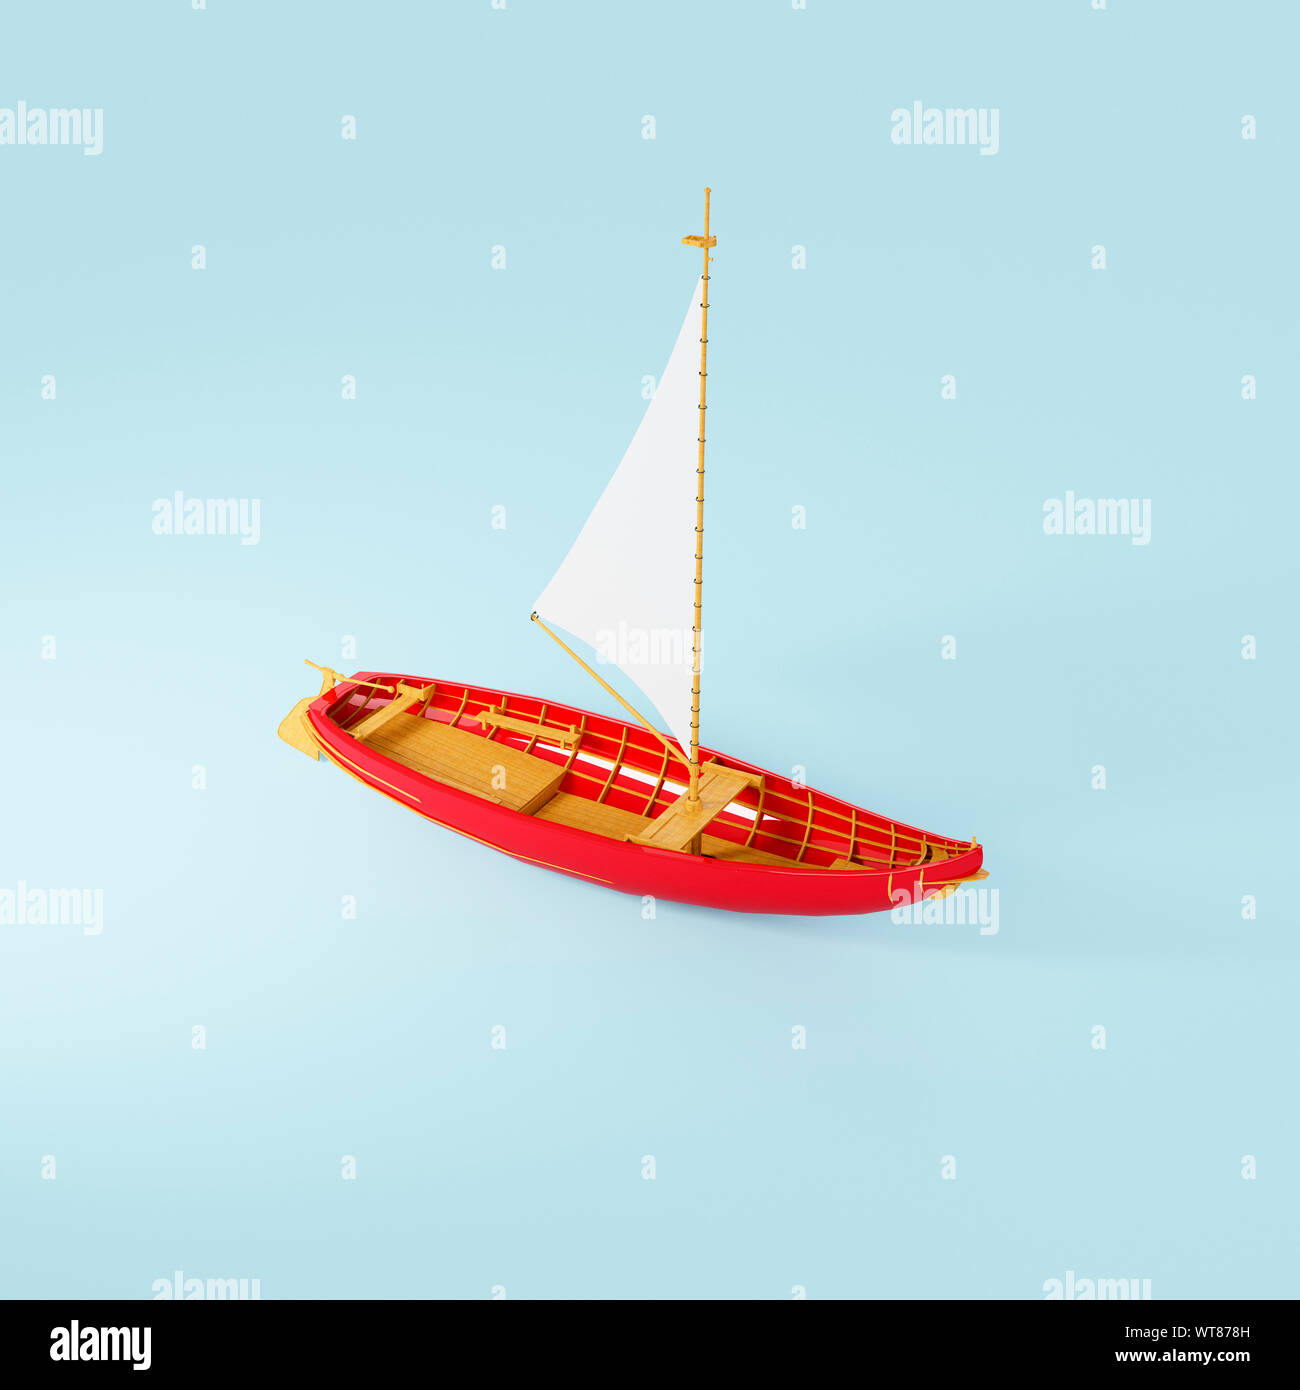 Childrens wooden toys, a wooden sailing boat toy Stock Photo